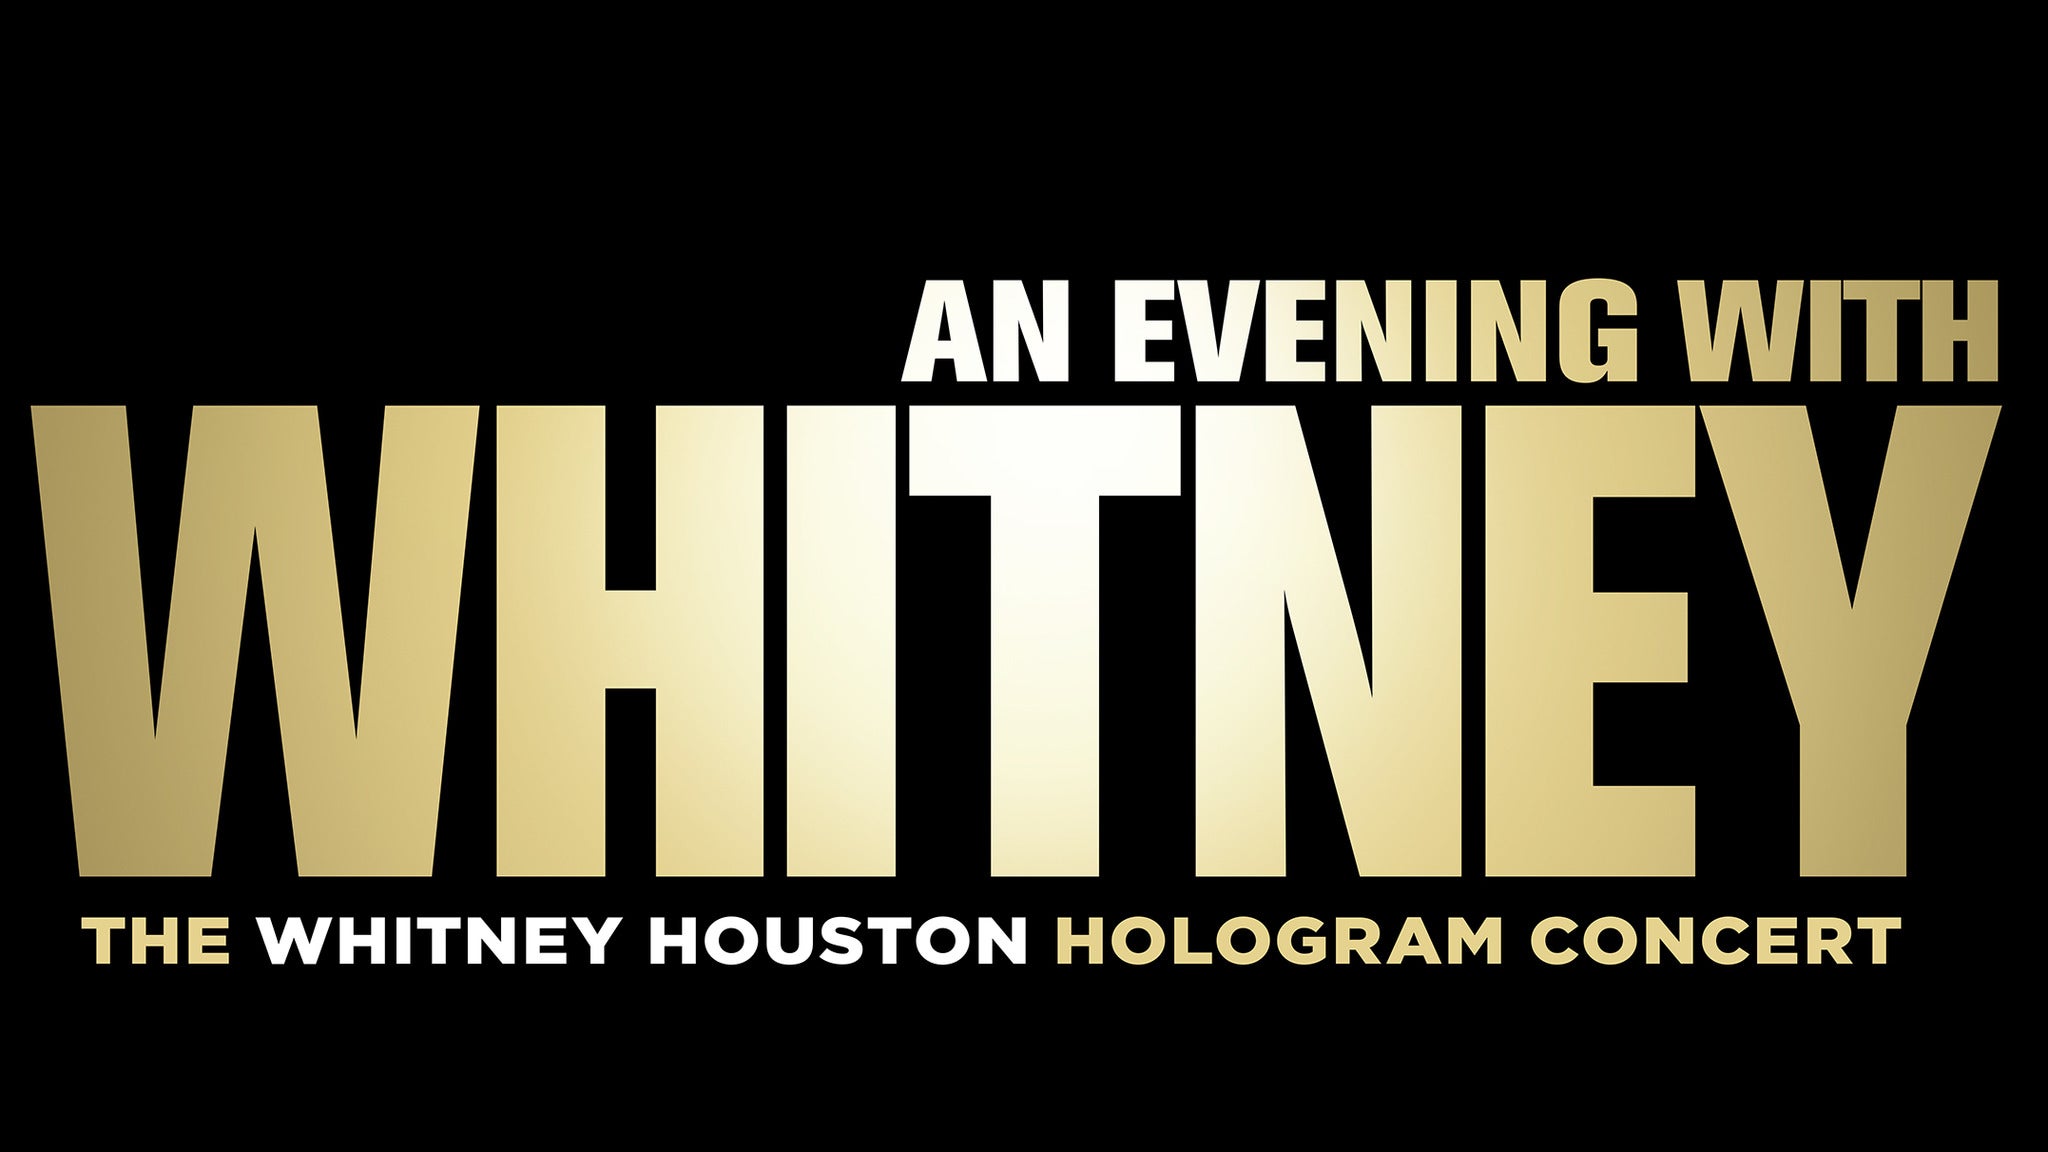 An Evening With Whitney: The Whitney Houston Hologram Concert in Las Vegas promo photo for Official Platinum presale offer code